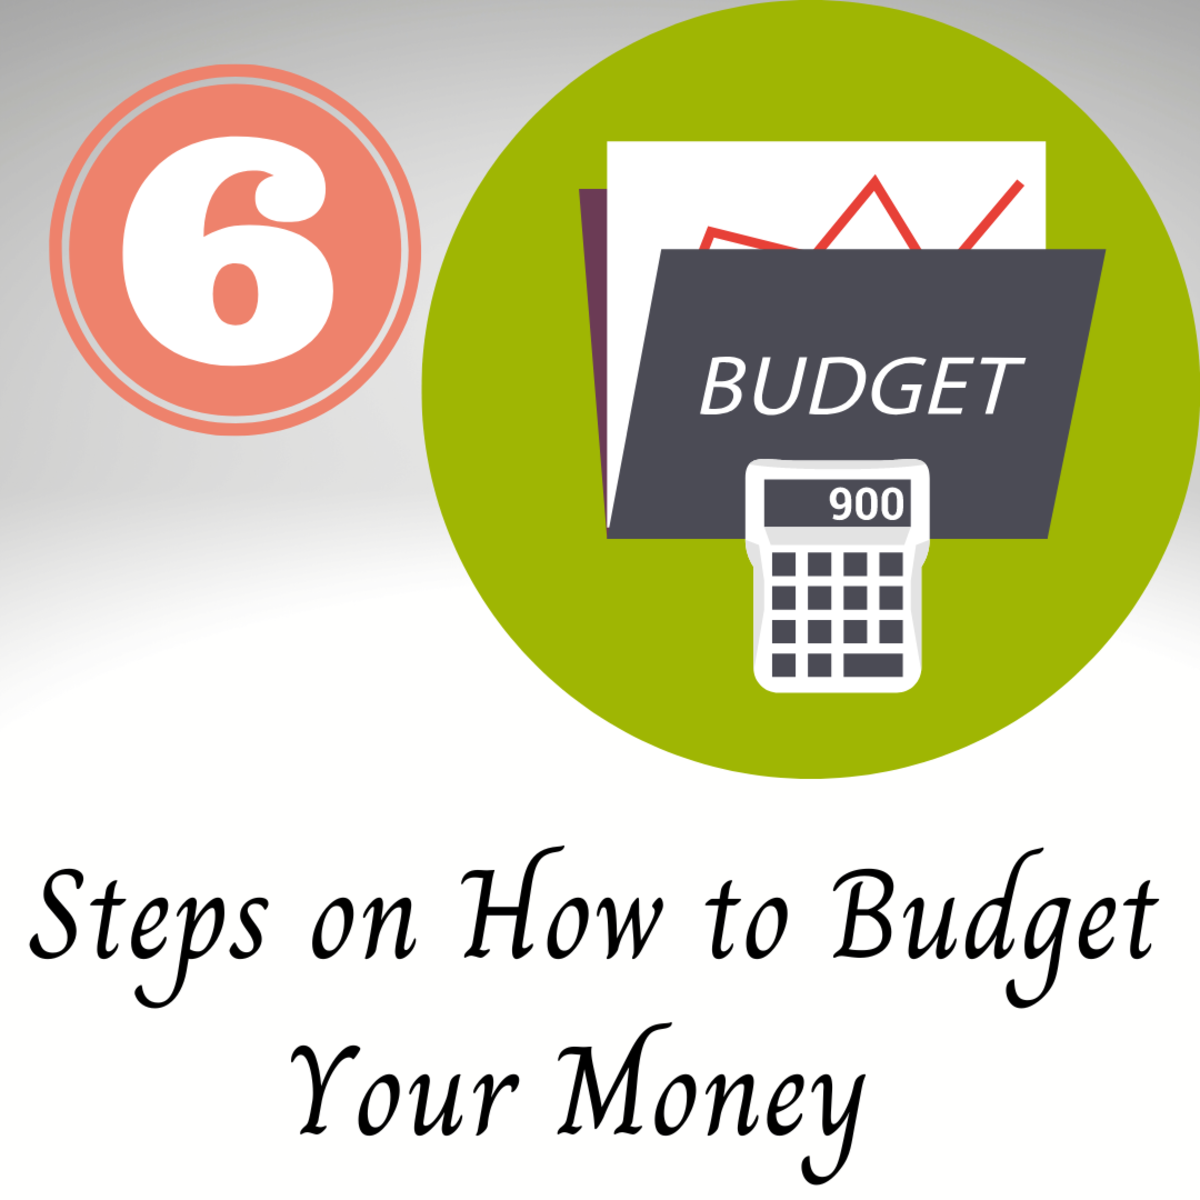 These easy steps on how to budget your money will help you in your journey towards financial freedom.